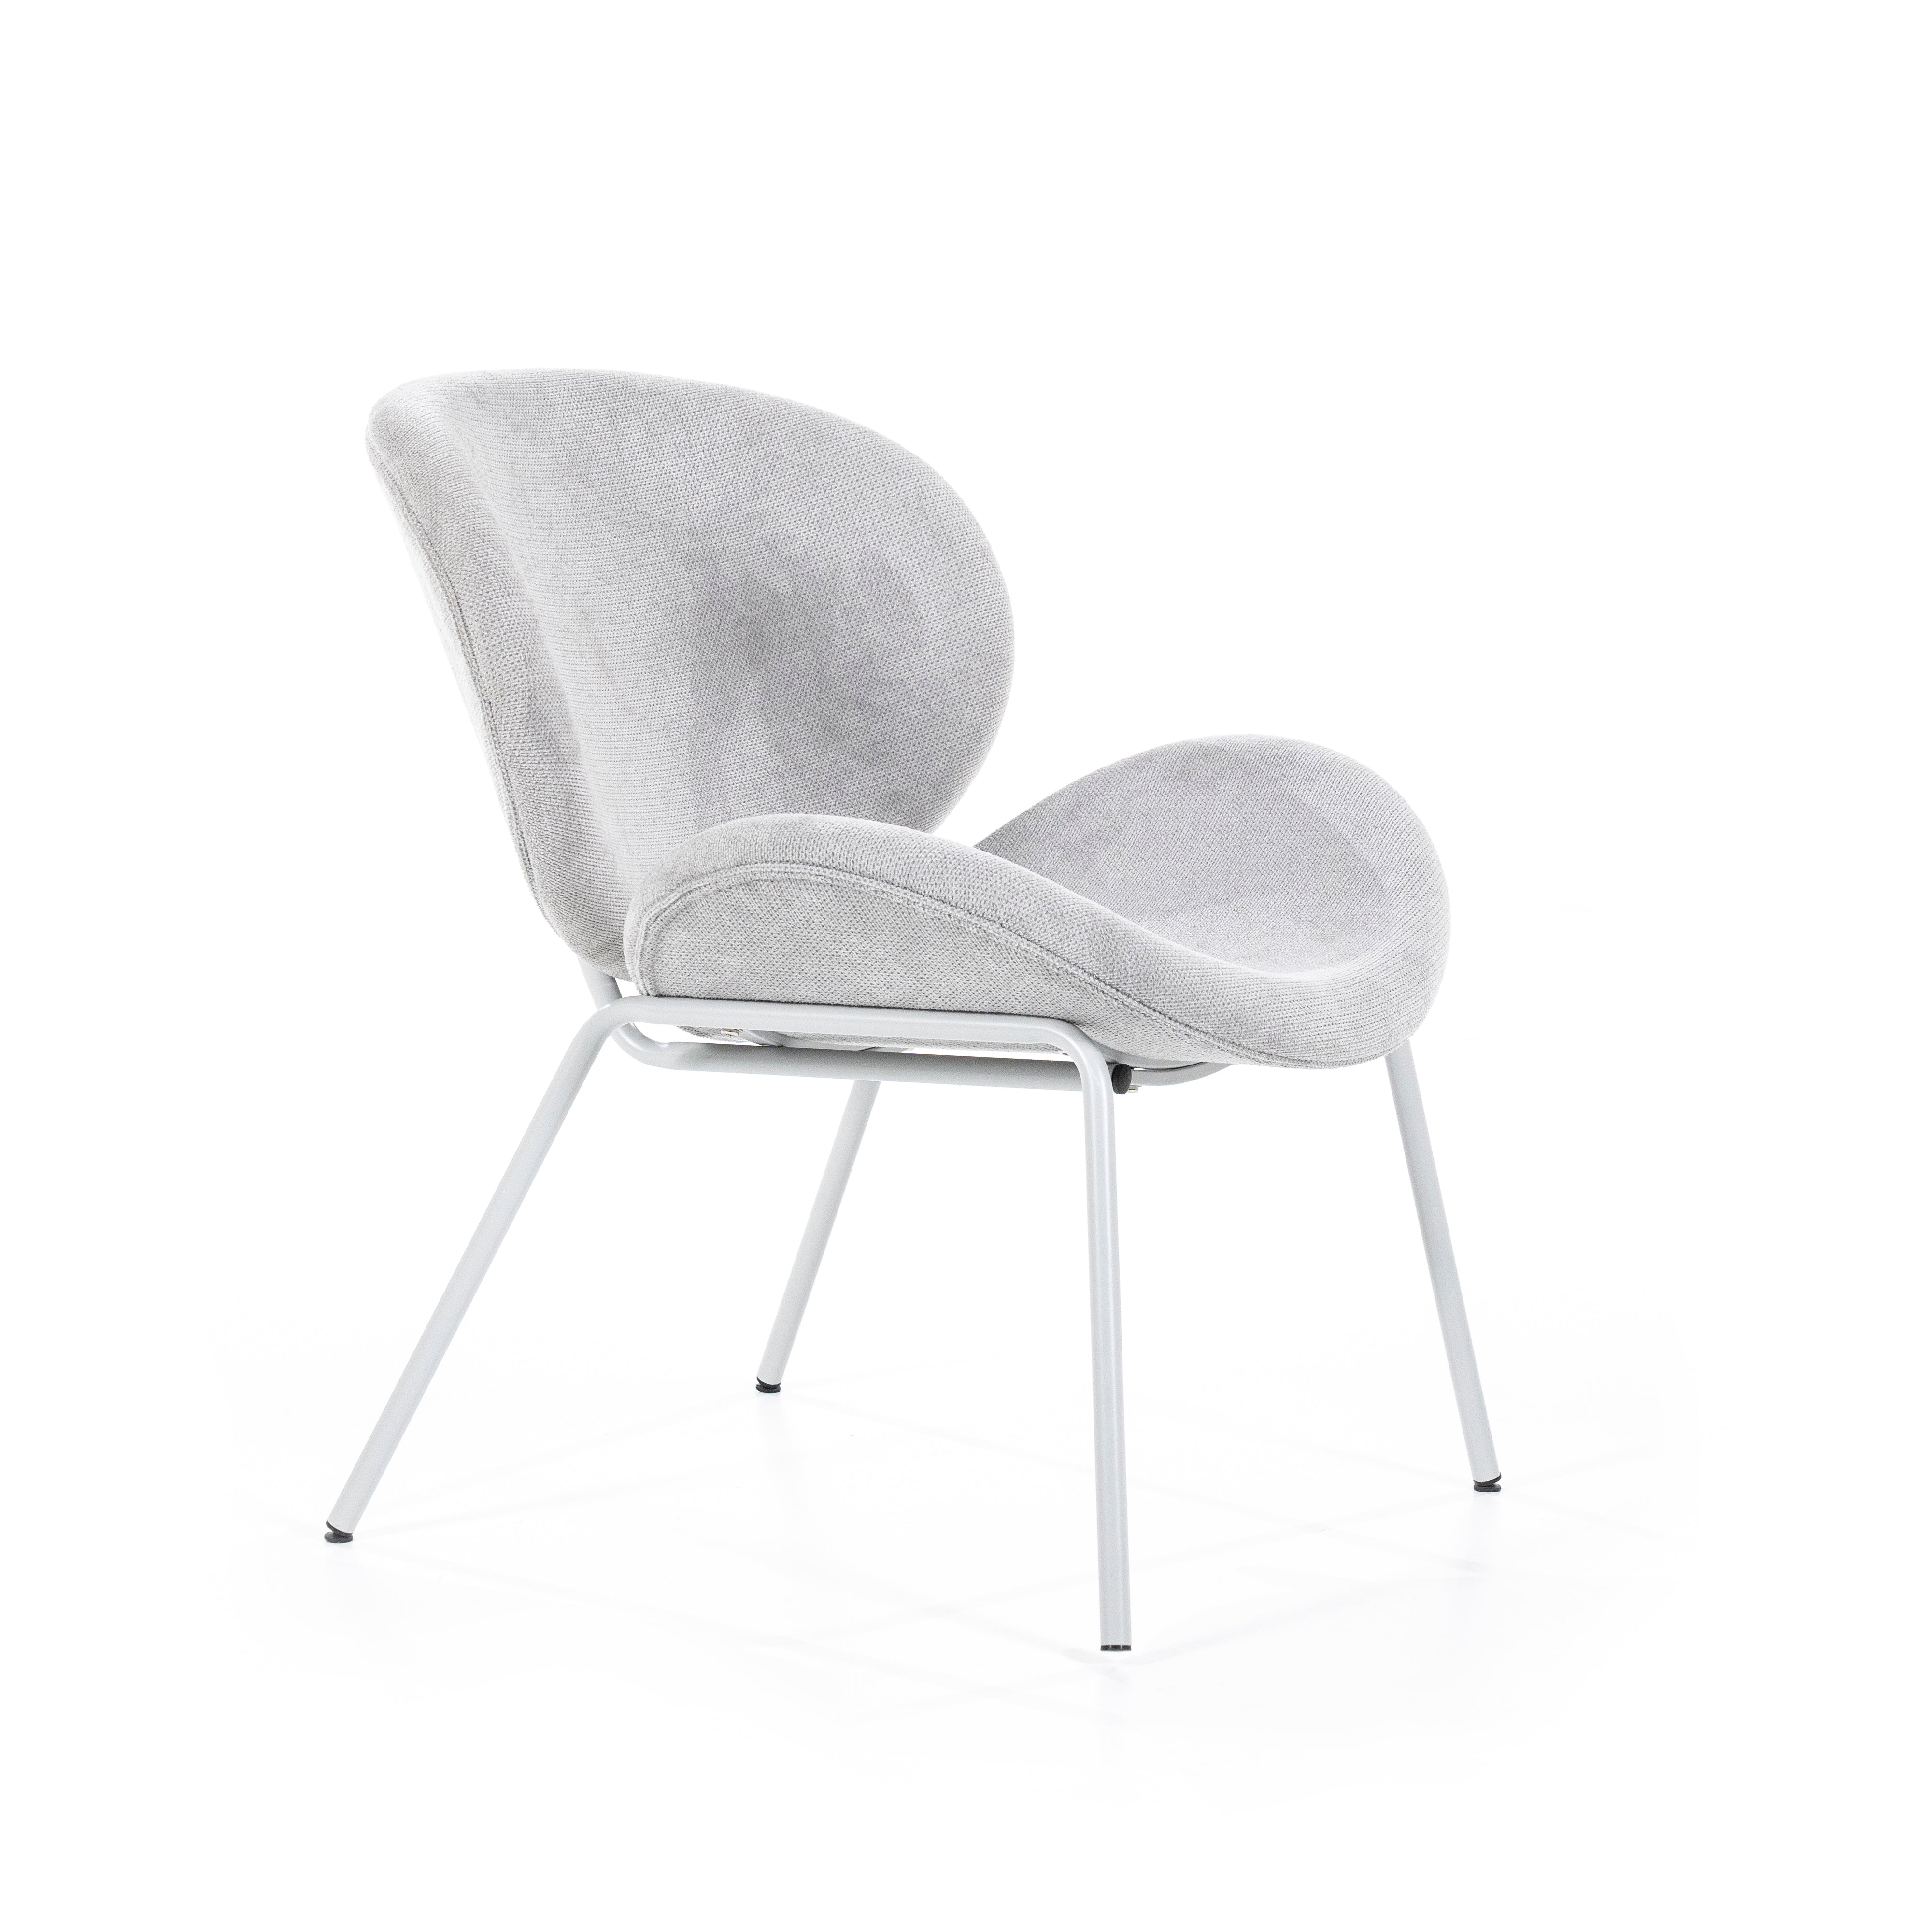 By-Boo Lounge chair Ace - grey